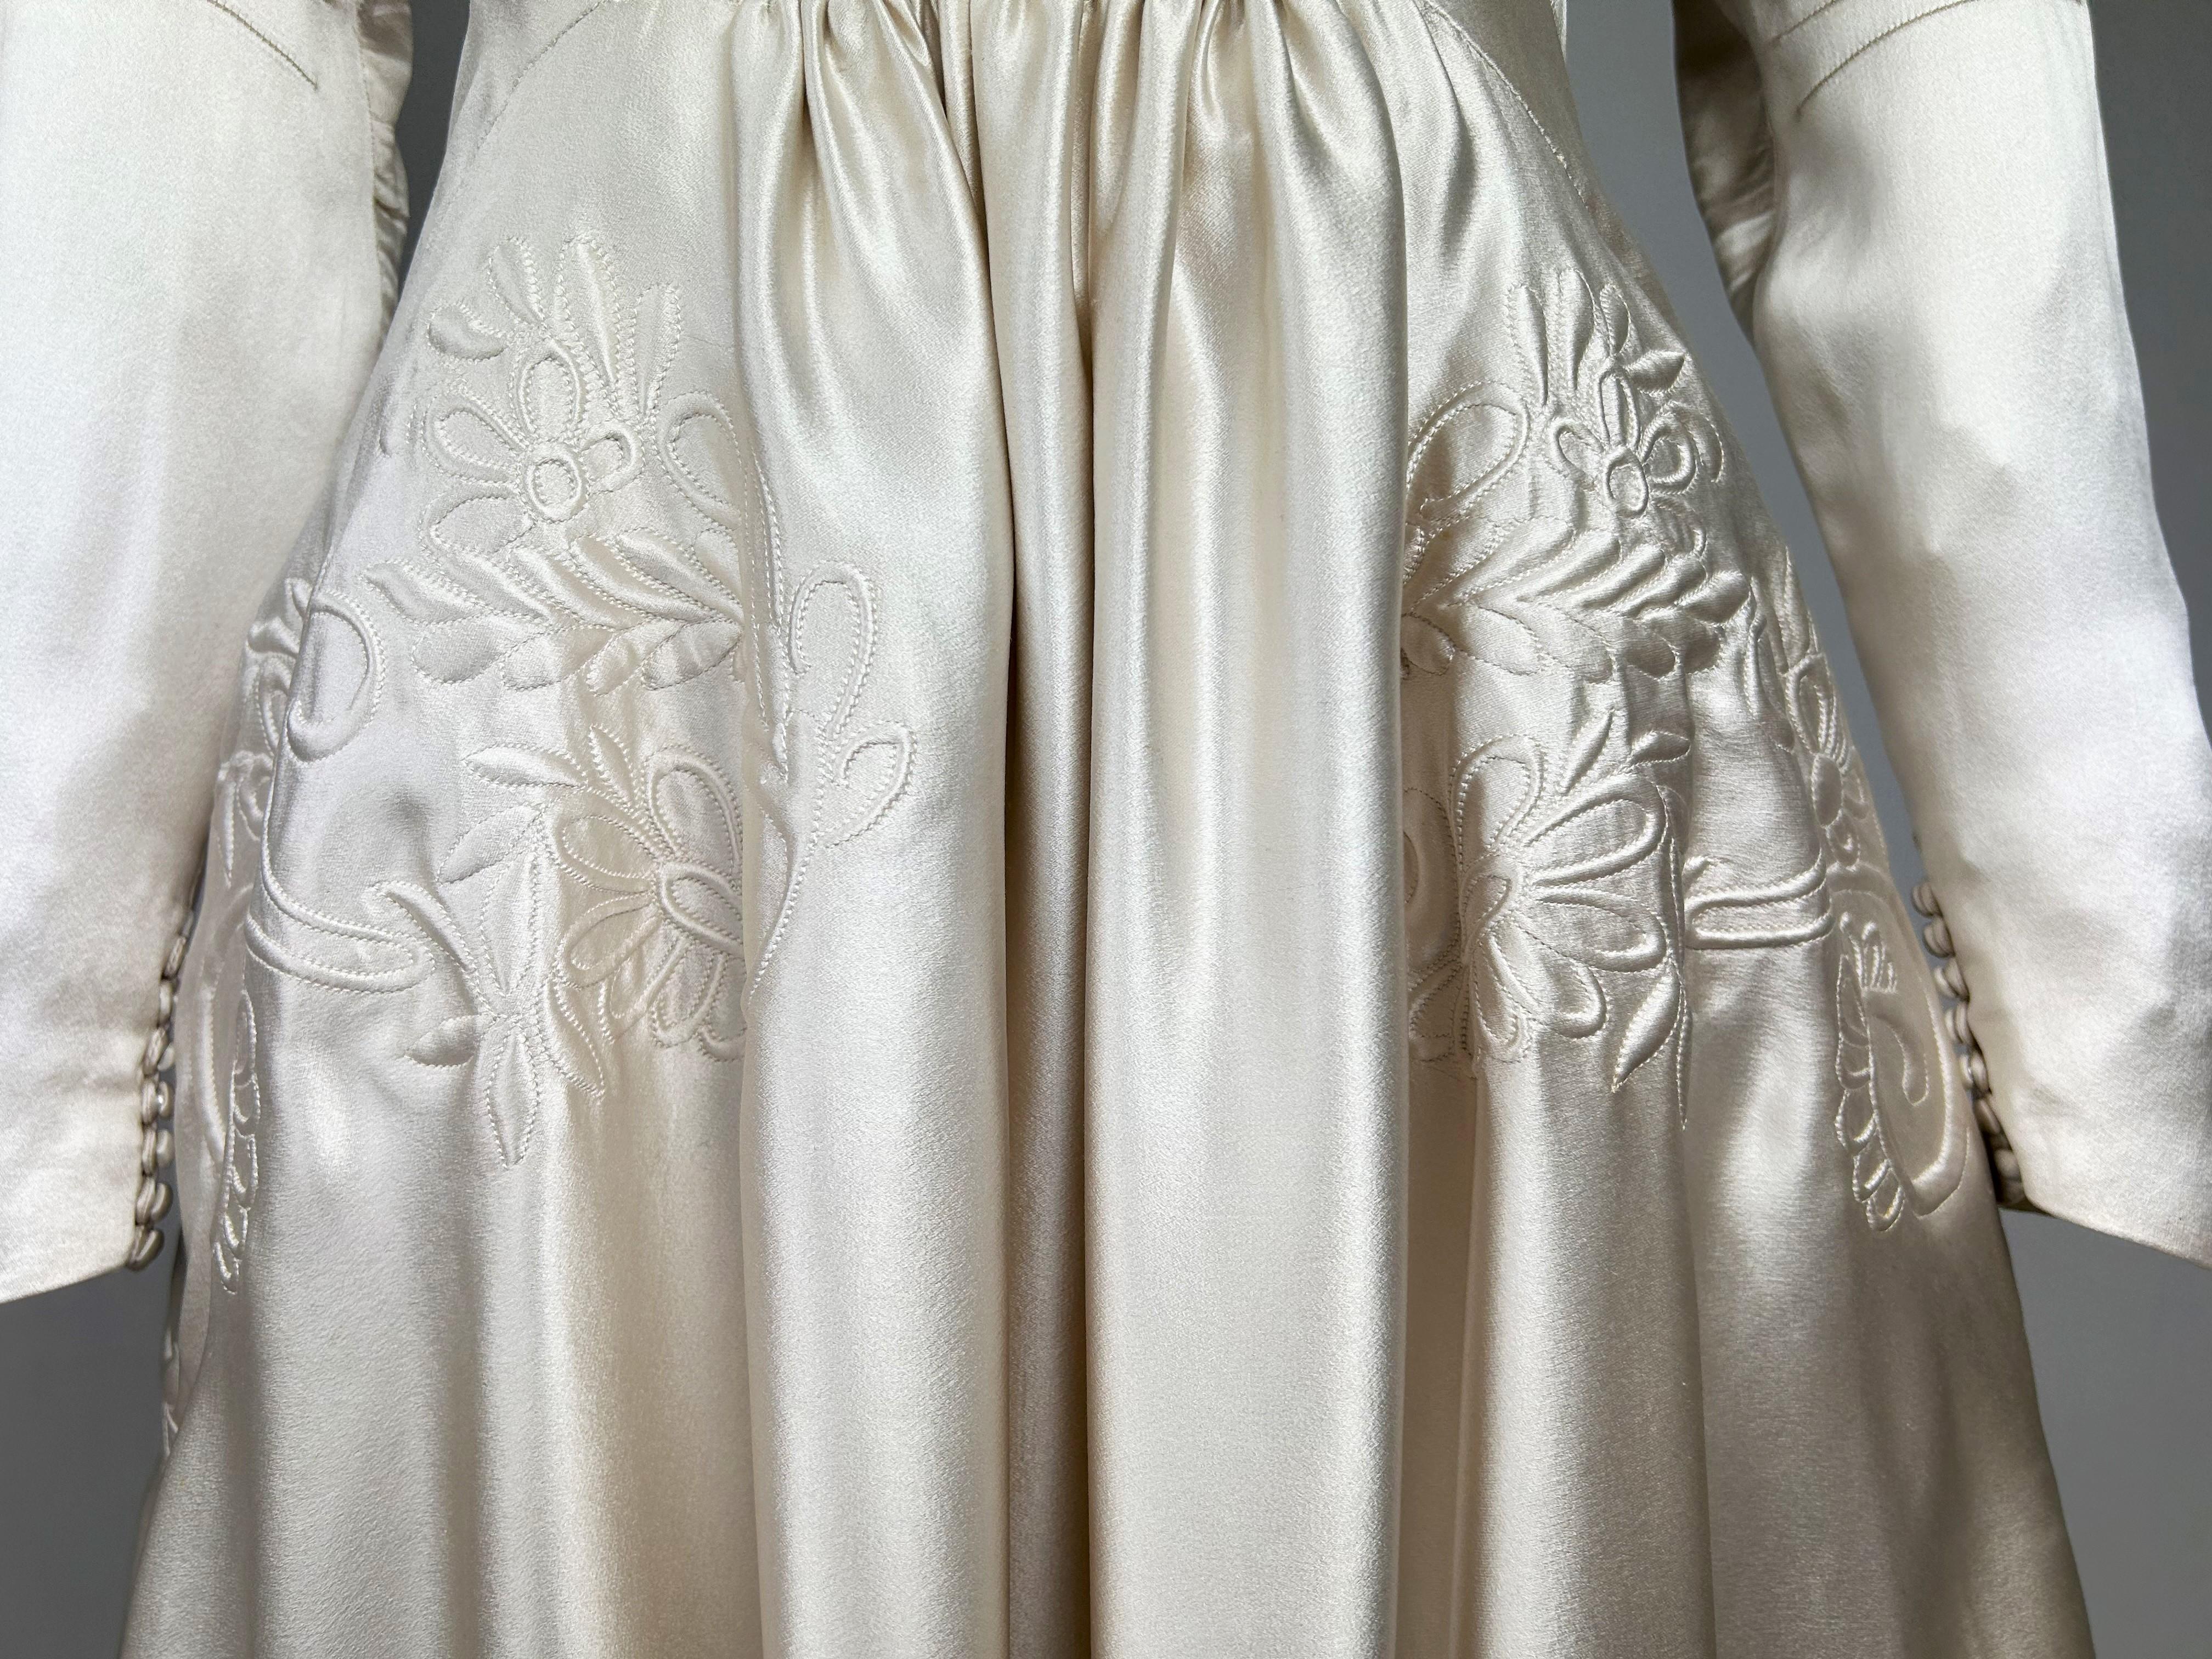 A Champagne Embroidered Satin Wedding Dress with train - France Circa 1940 For Sale 4